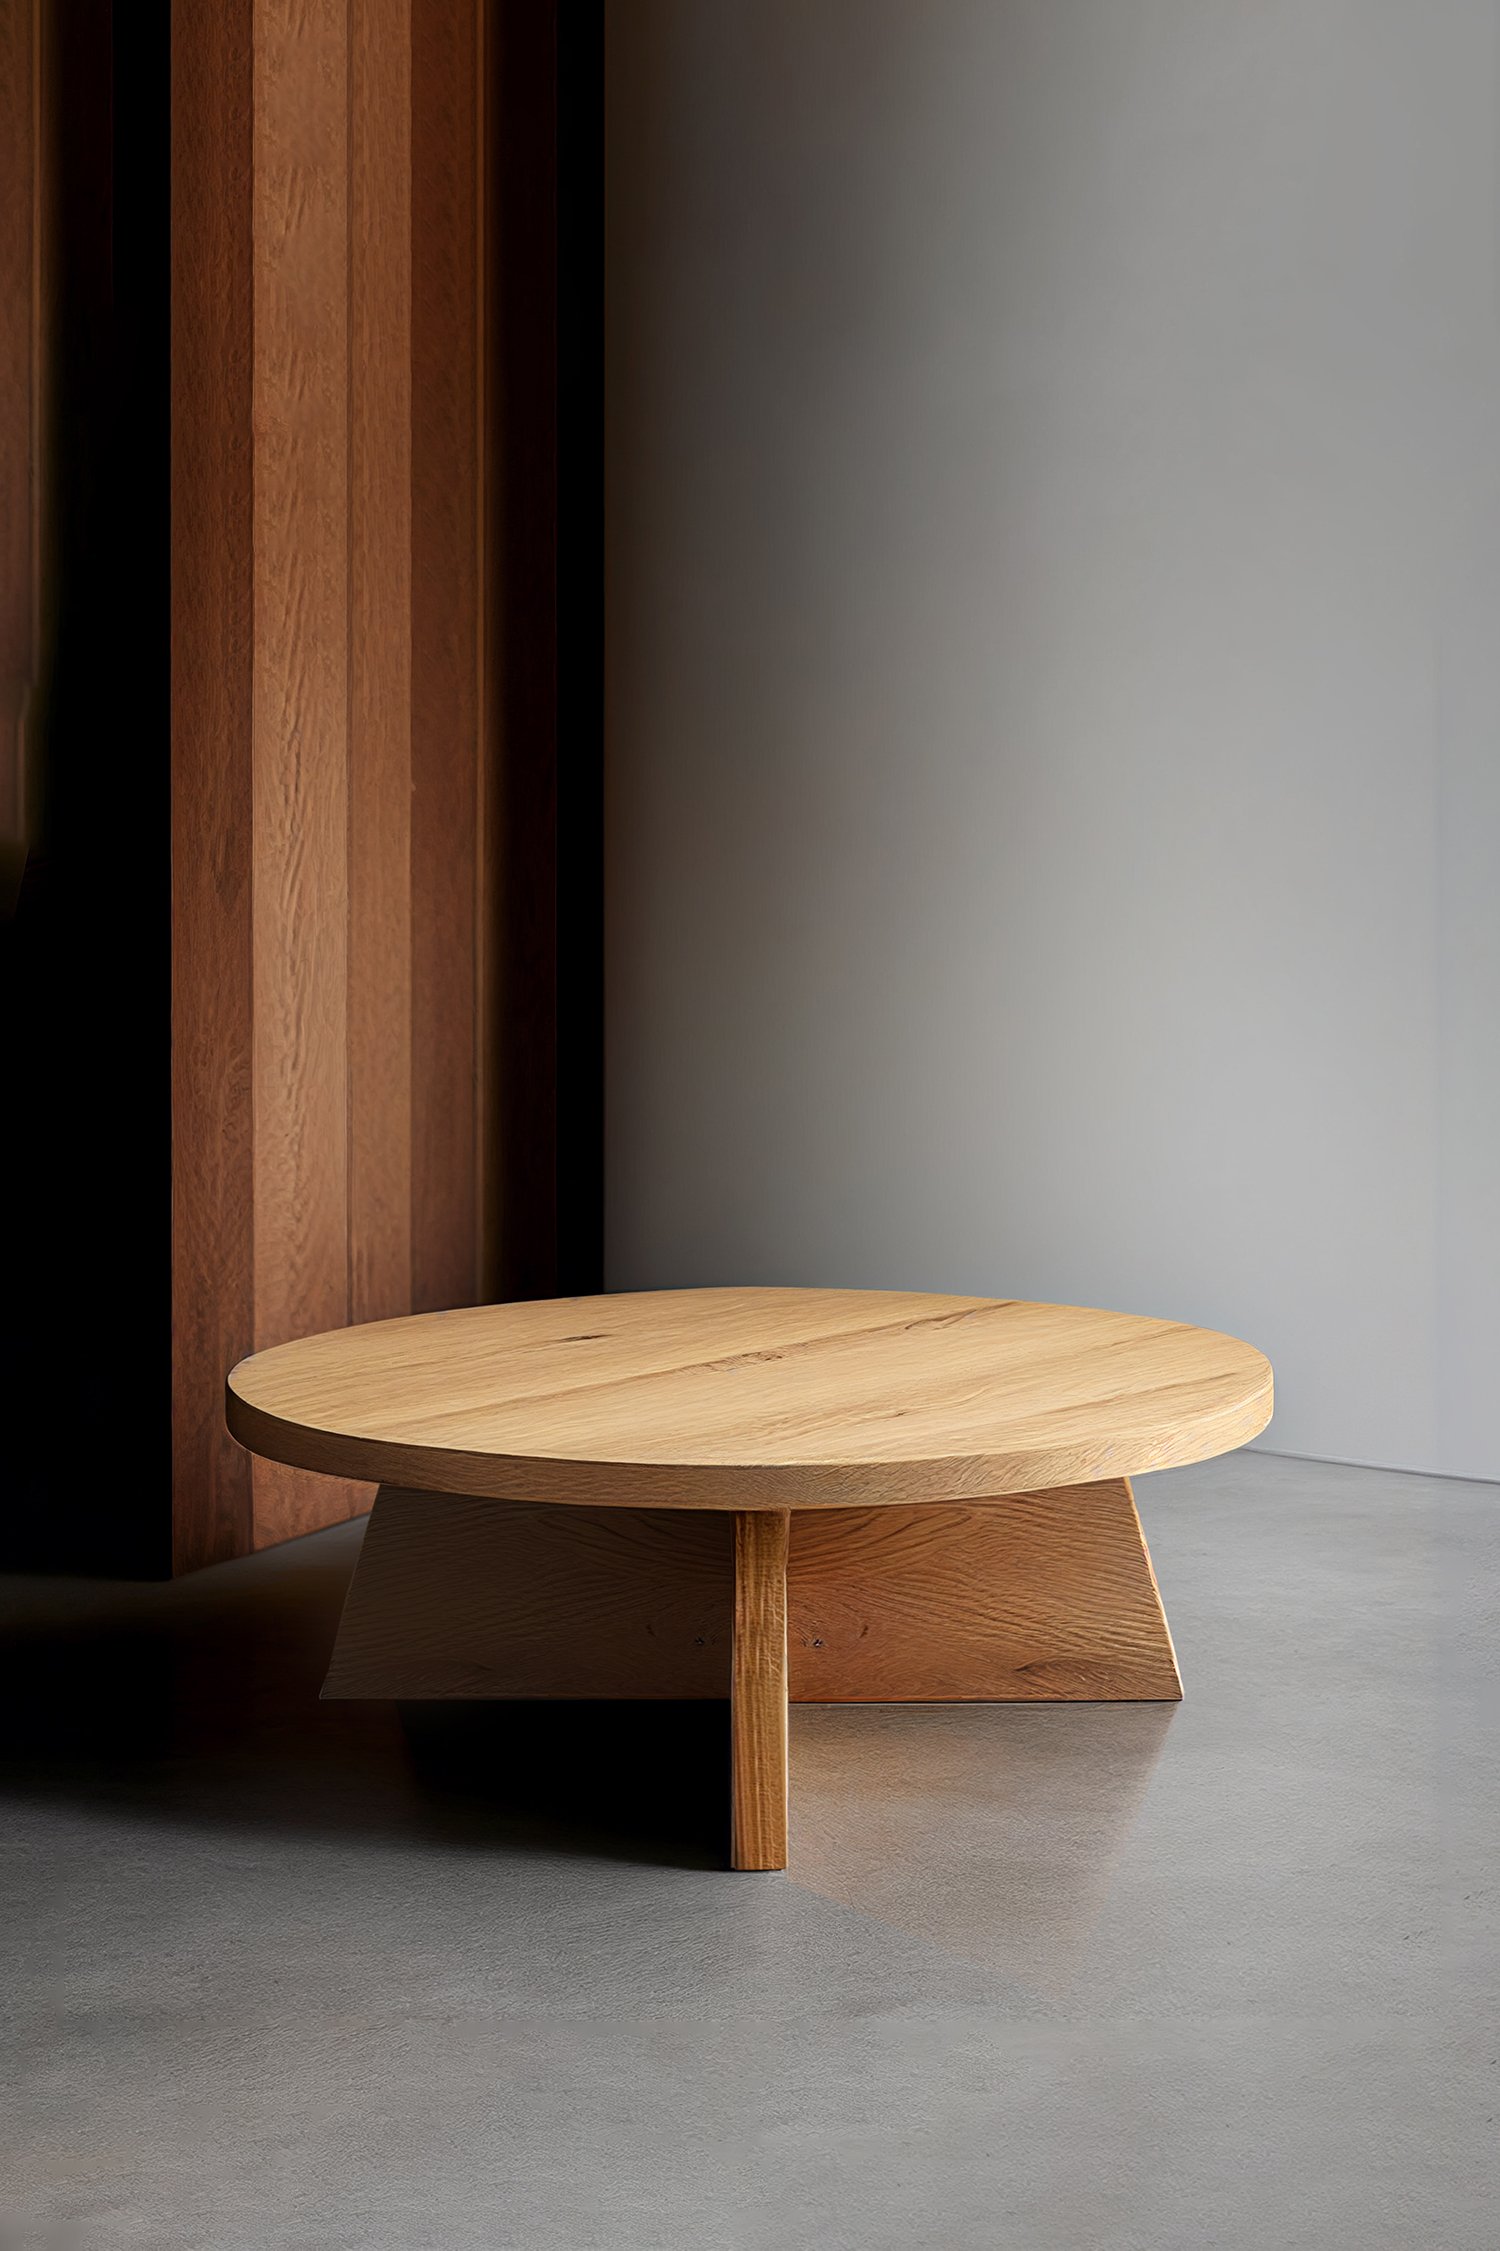 Cruciform Pyramid Base Solid Wood Round Table By NONO 4.jpg